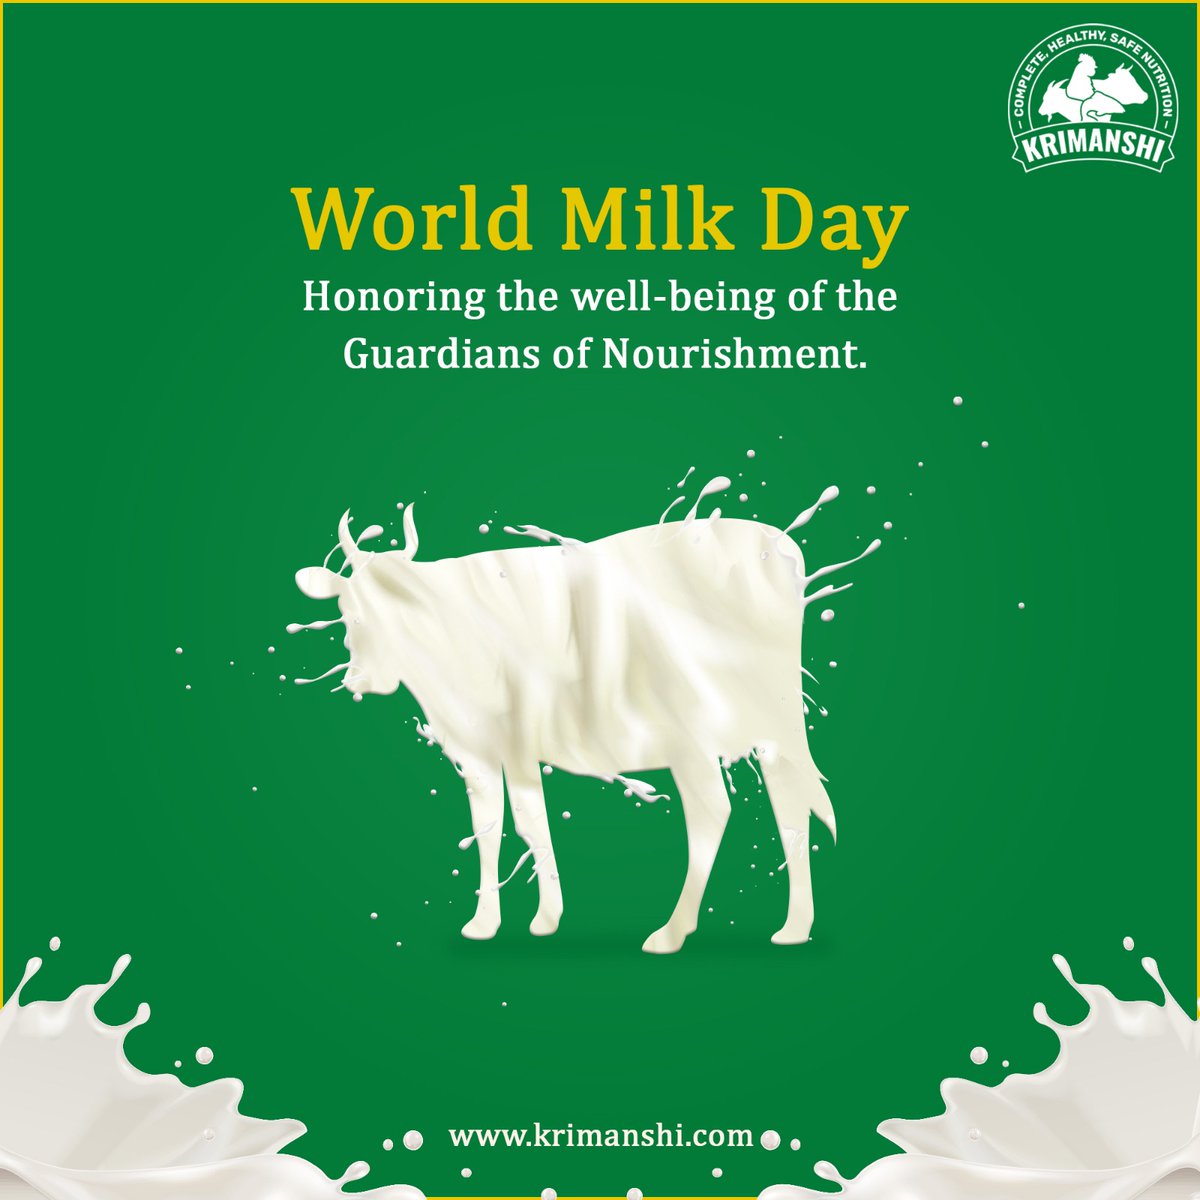 Honoring the well-being of the Guardians of Nourishment.

#WorldMilkDay #milkday #cattlehealth #cattlefeed #krimanshi